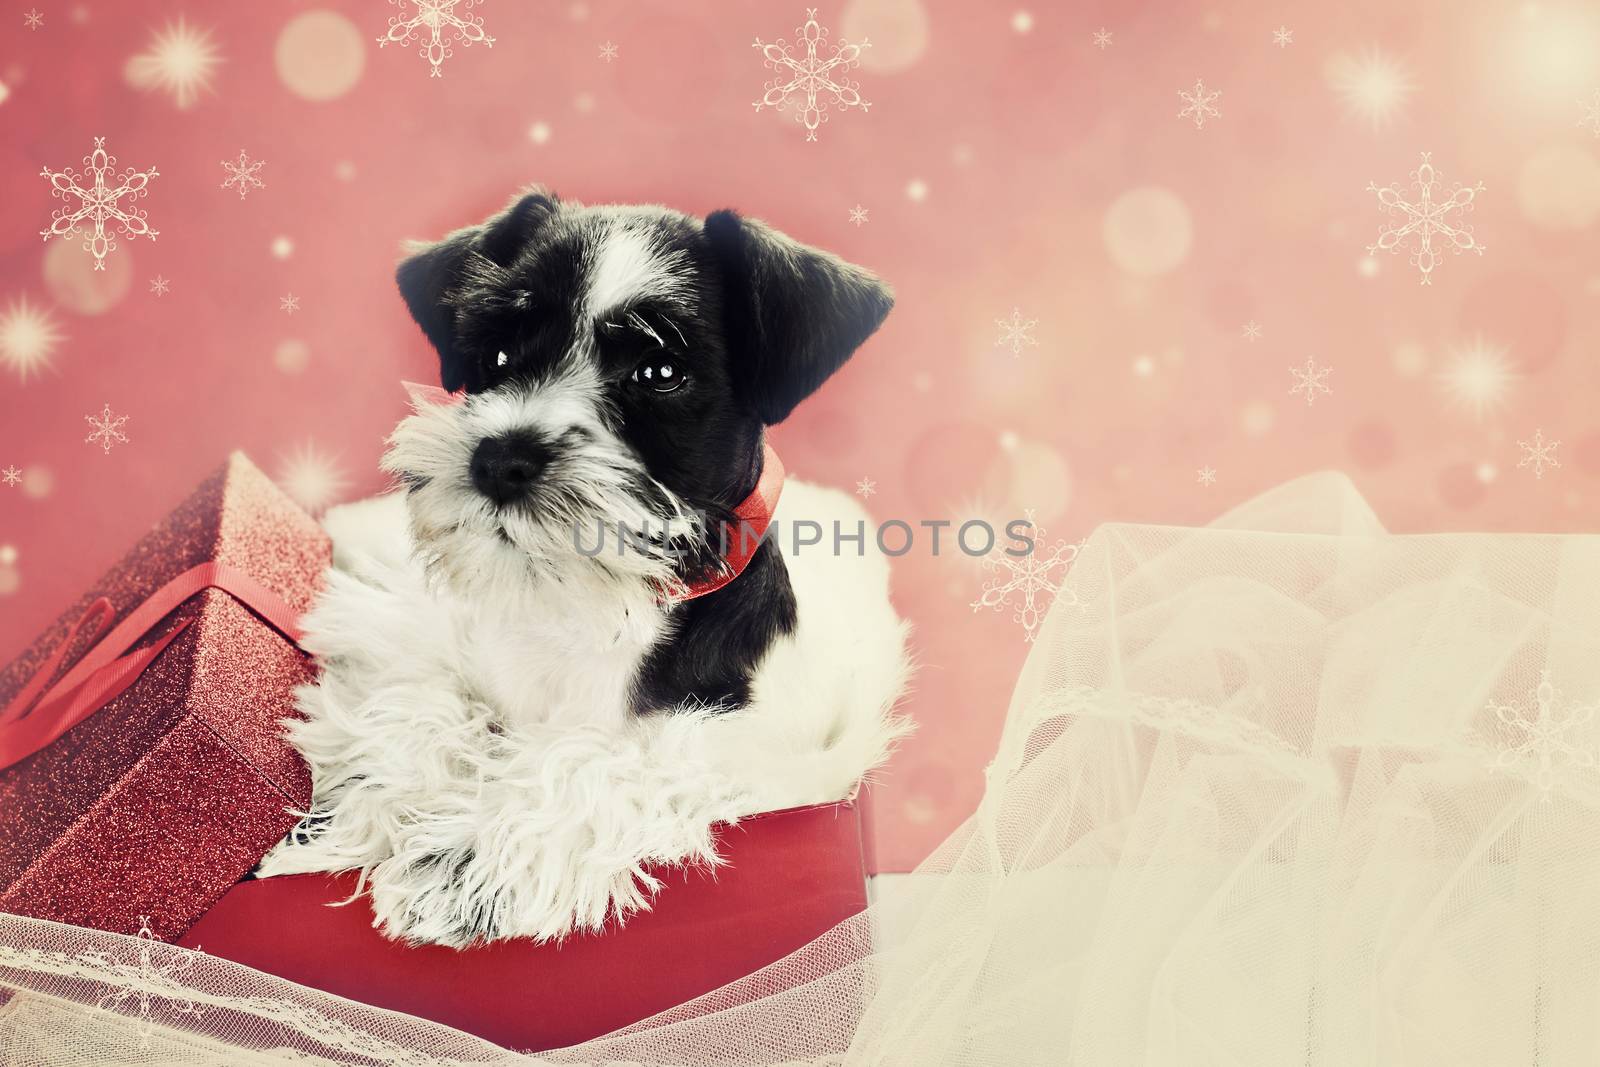 Retro image of a cute little black and white Mini Schnauzer puppy peeping out of a beautiful red festive Christmas present. Extreme shallow depth of field with selective focus on puppies face.